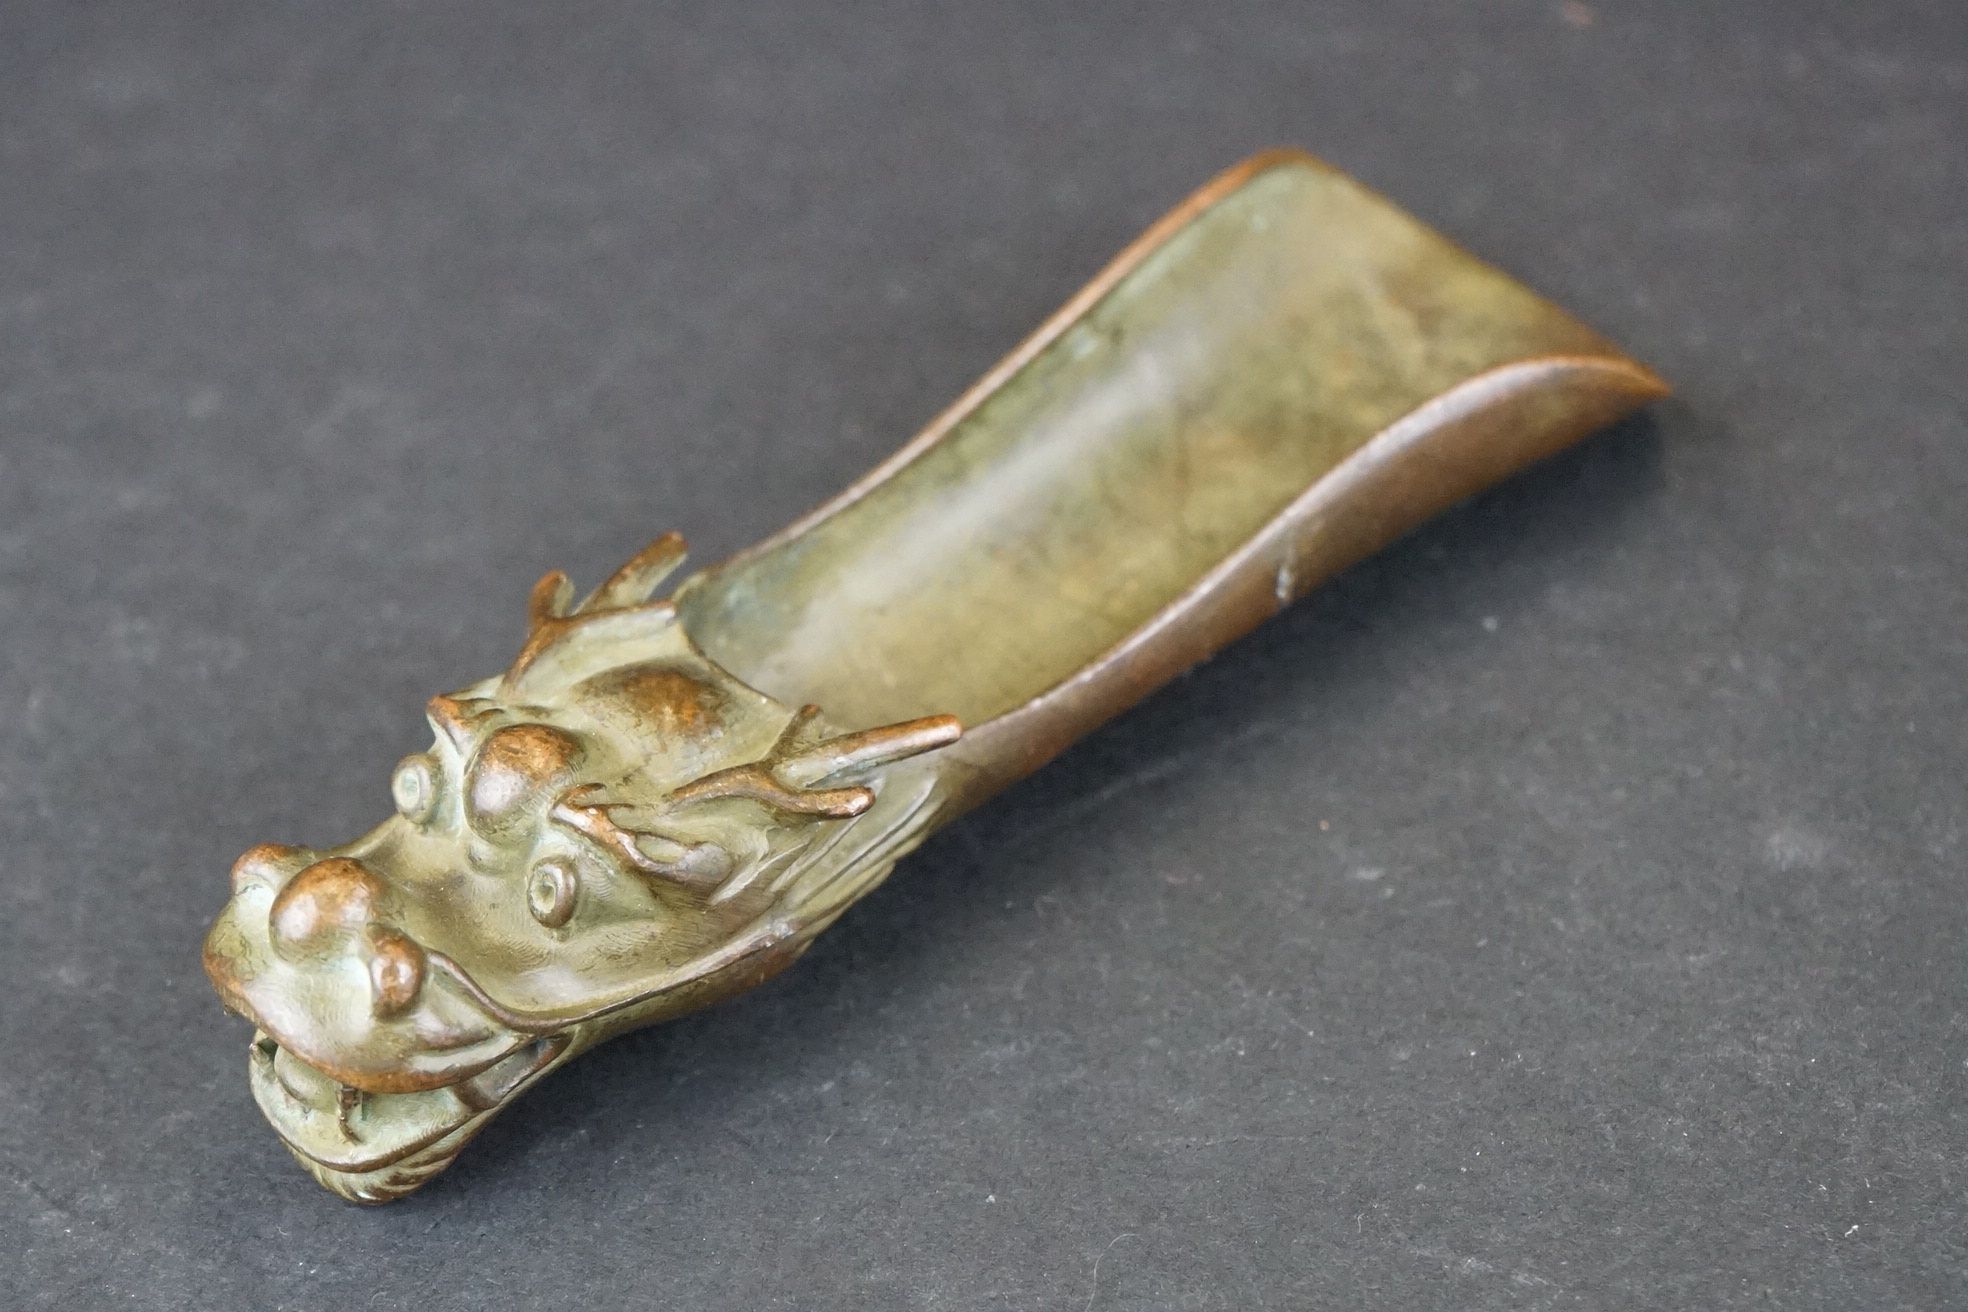 Bronze oriental spoon / scoop with dragon handle decoration, approx. 13cm long